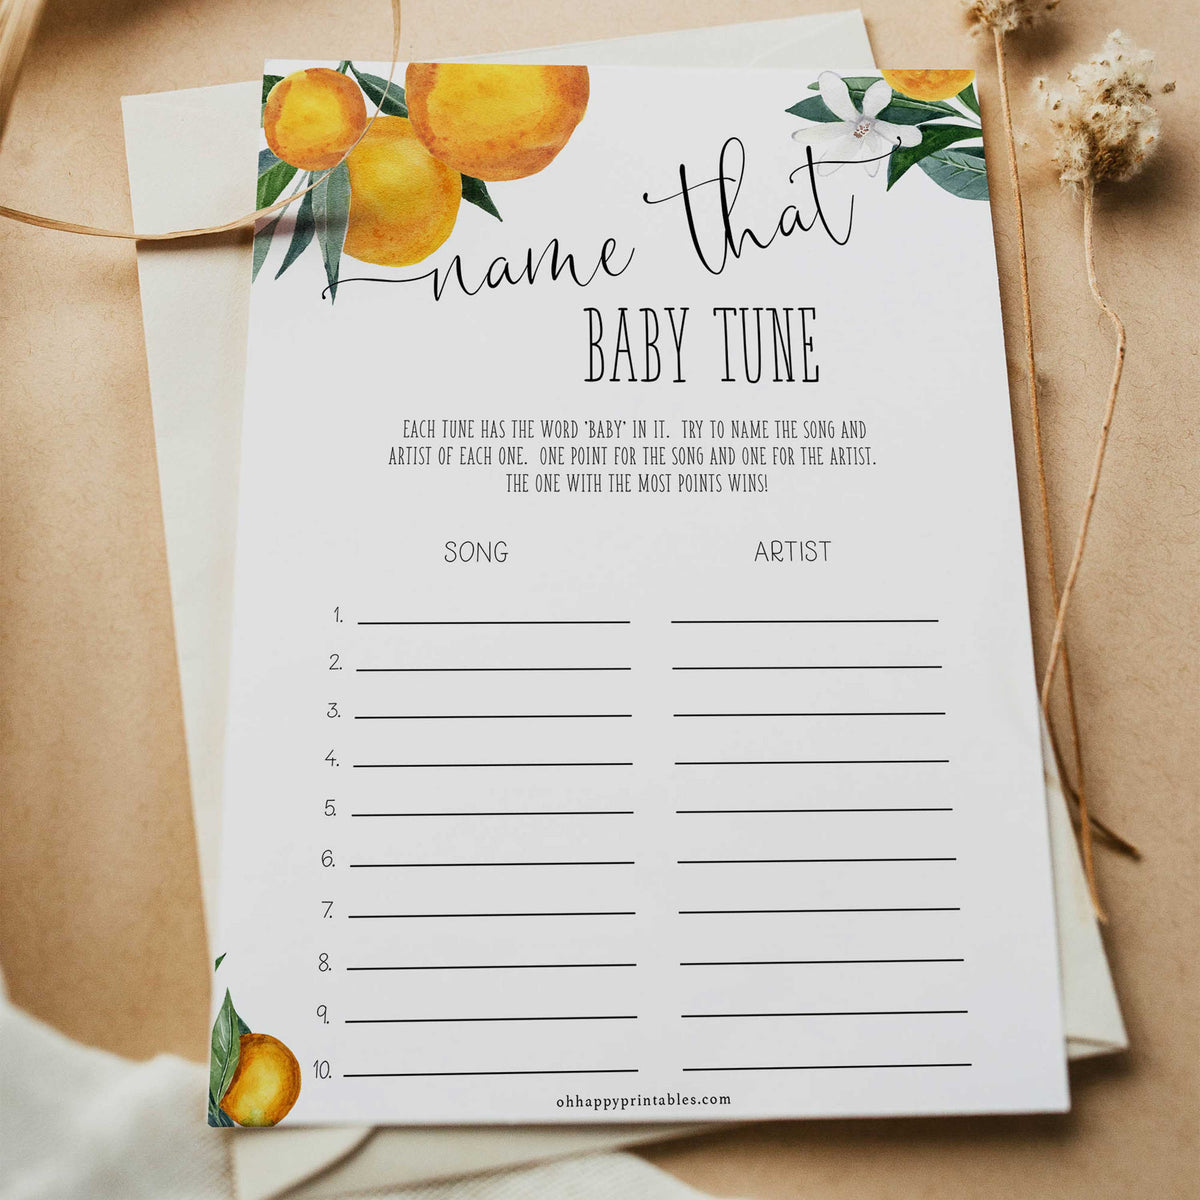 name that baby tune game, Printable baby shower games, little cutie baby games, baby shower games, fun baby shower ideas, top baby shower ideas, little cutie baby shower, baby shower games, fun little cutie baby shower ideas, citrus baby shower games, citrus baby shower, orange baby shower